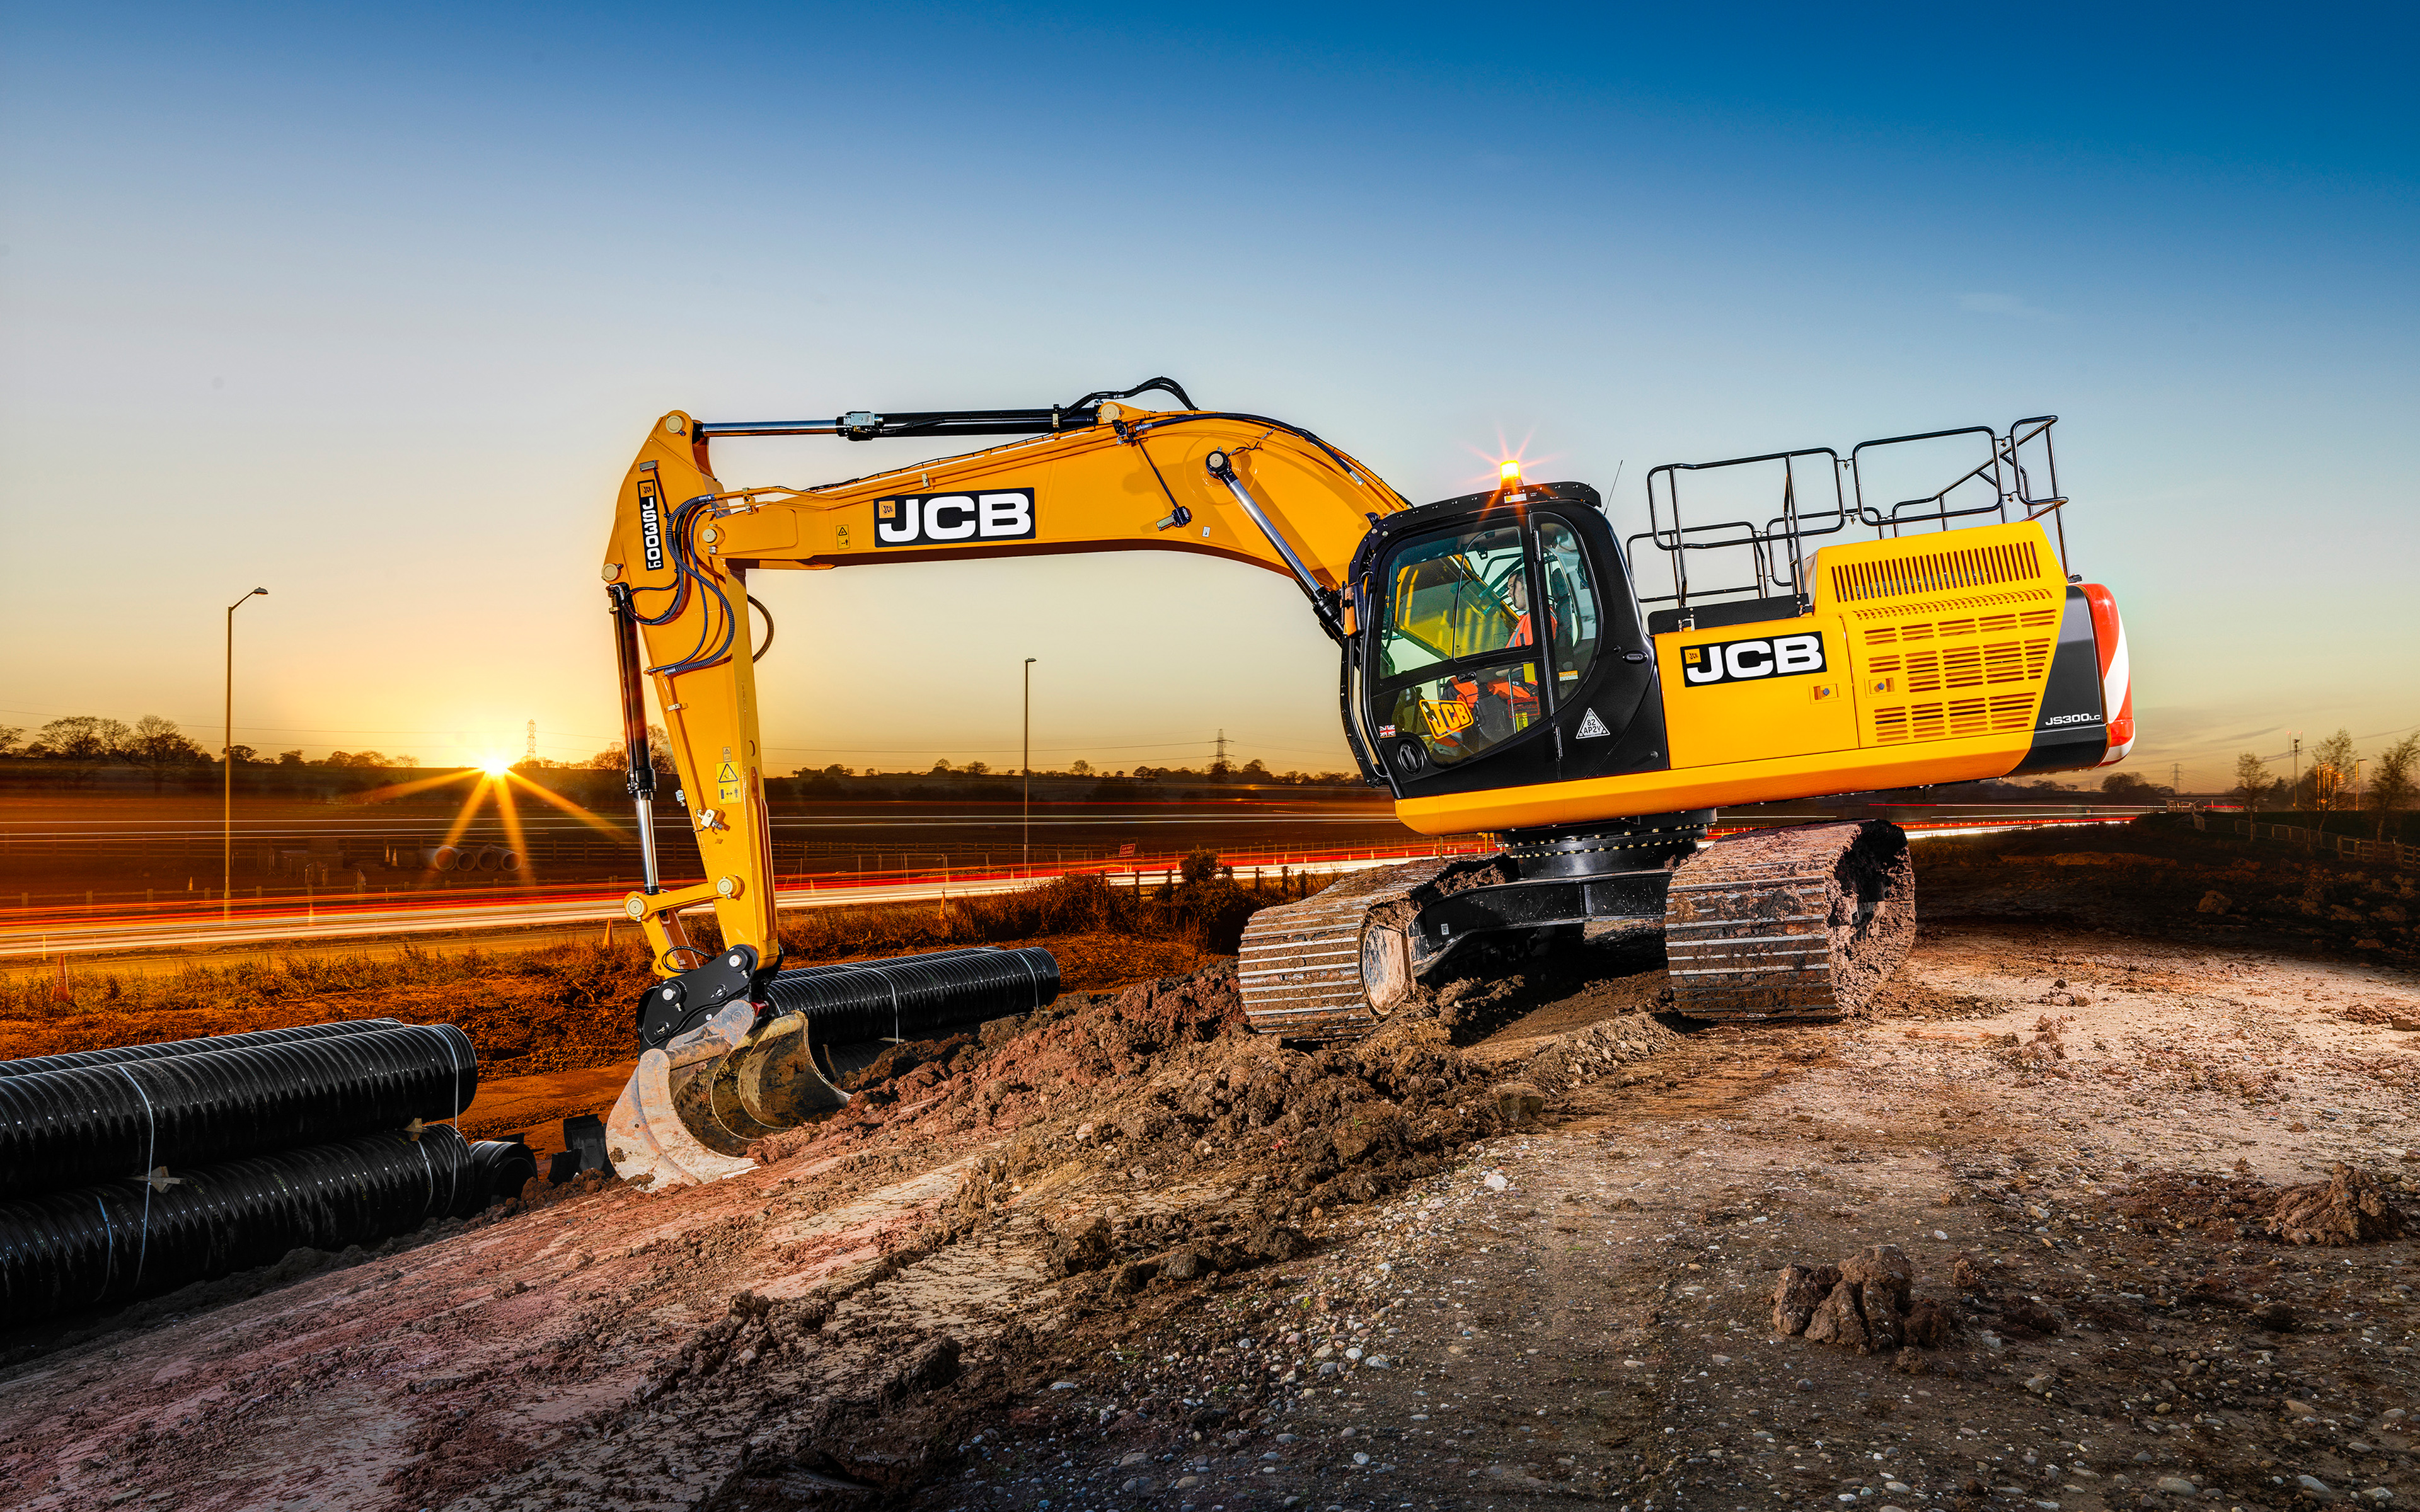 Download wallpaper JCB JS Excavator, modern construction equipment, road construction, construction concepts for desktop with resolution 3840x2400. High Quality HD picture wallpaper